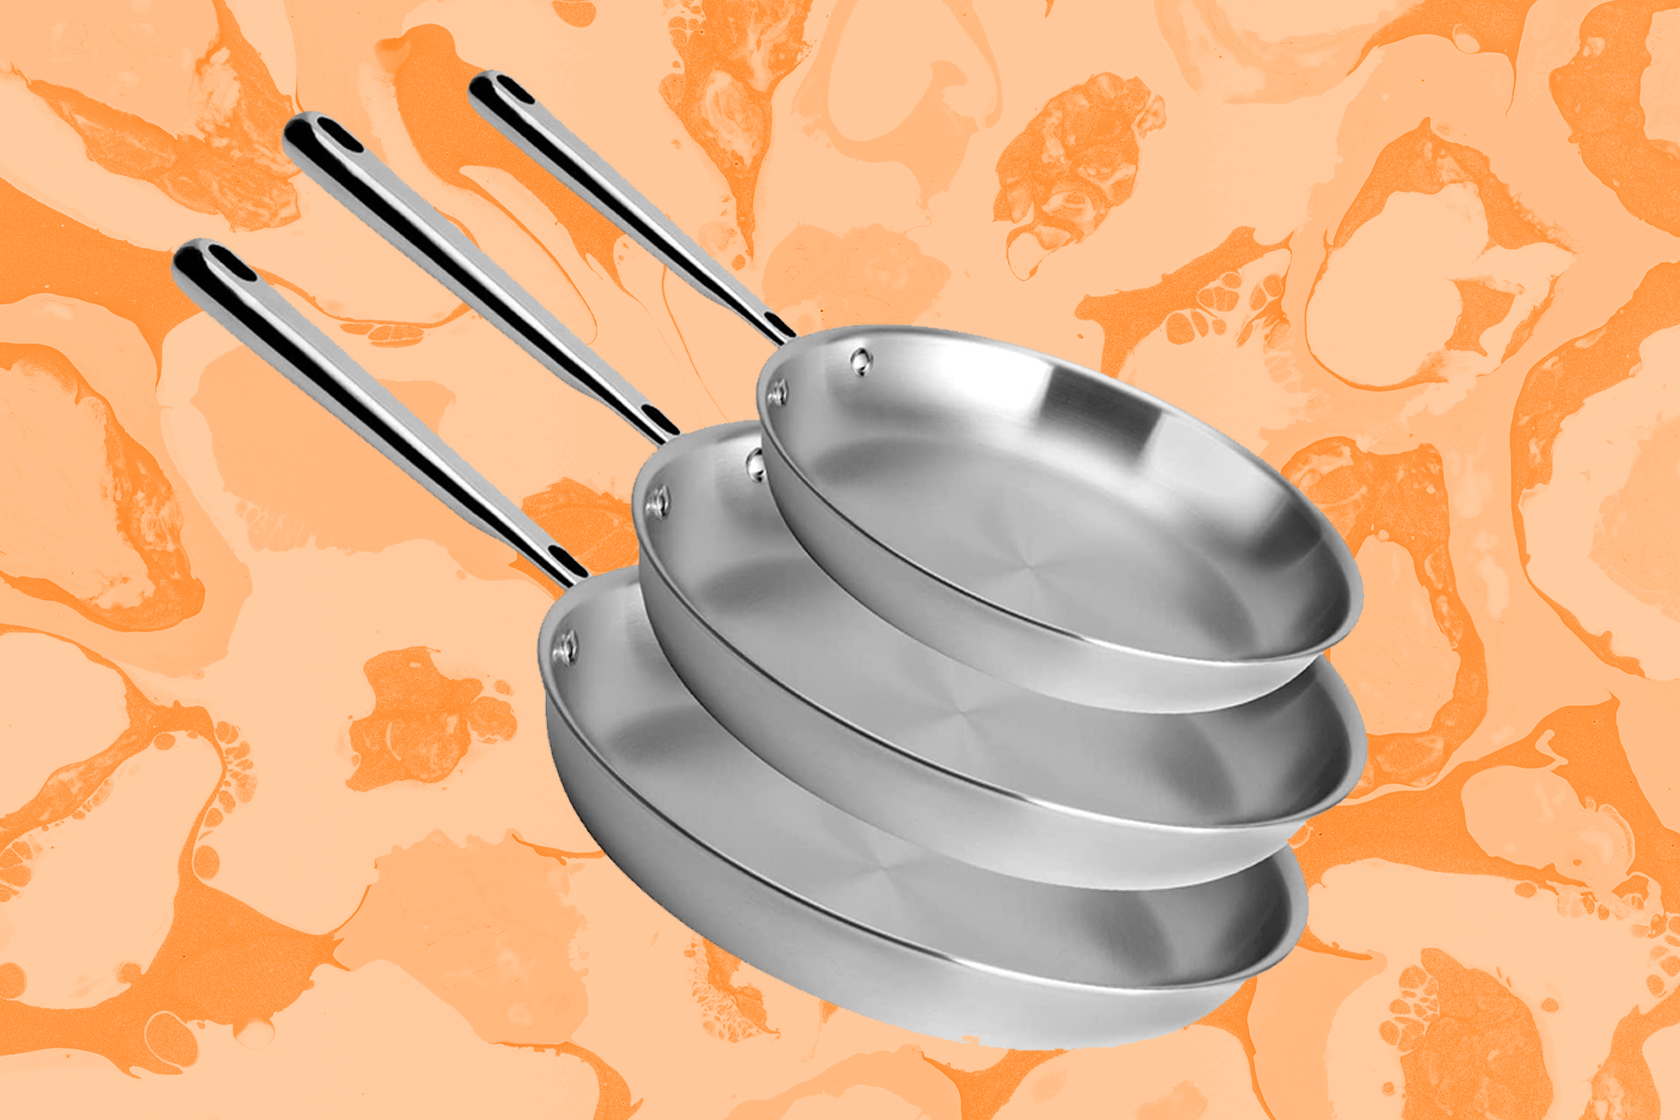 Misen Is Having a Rare Sale on Their Nonstick Pans